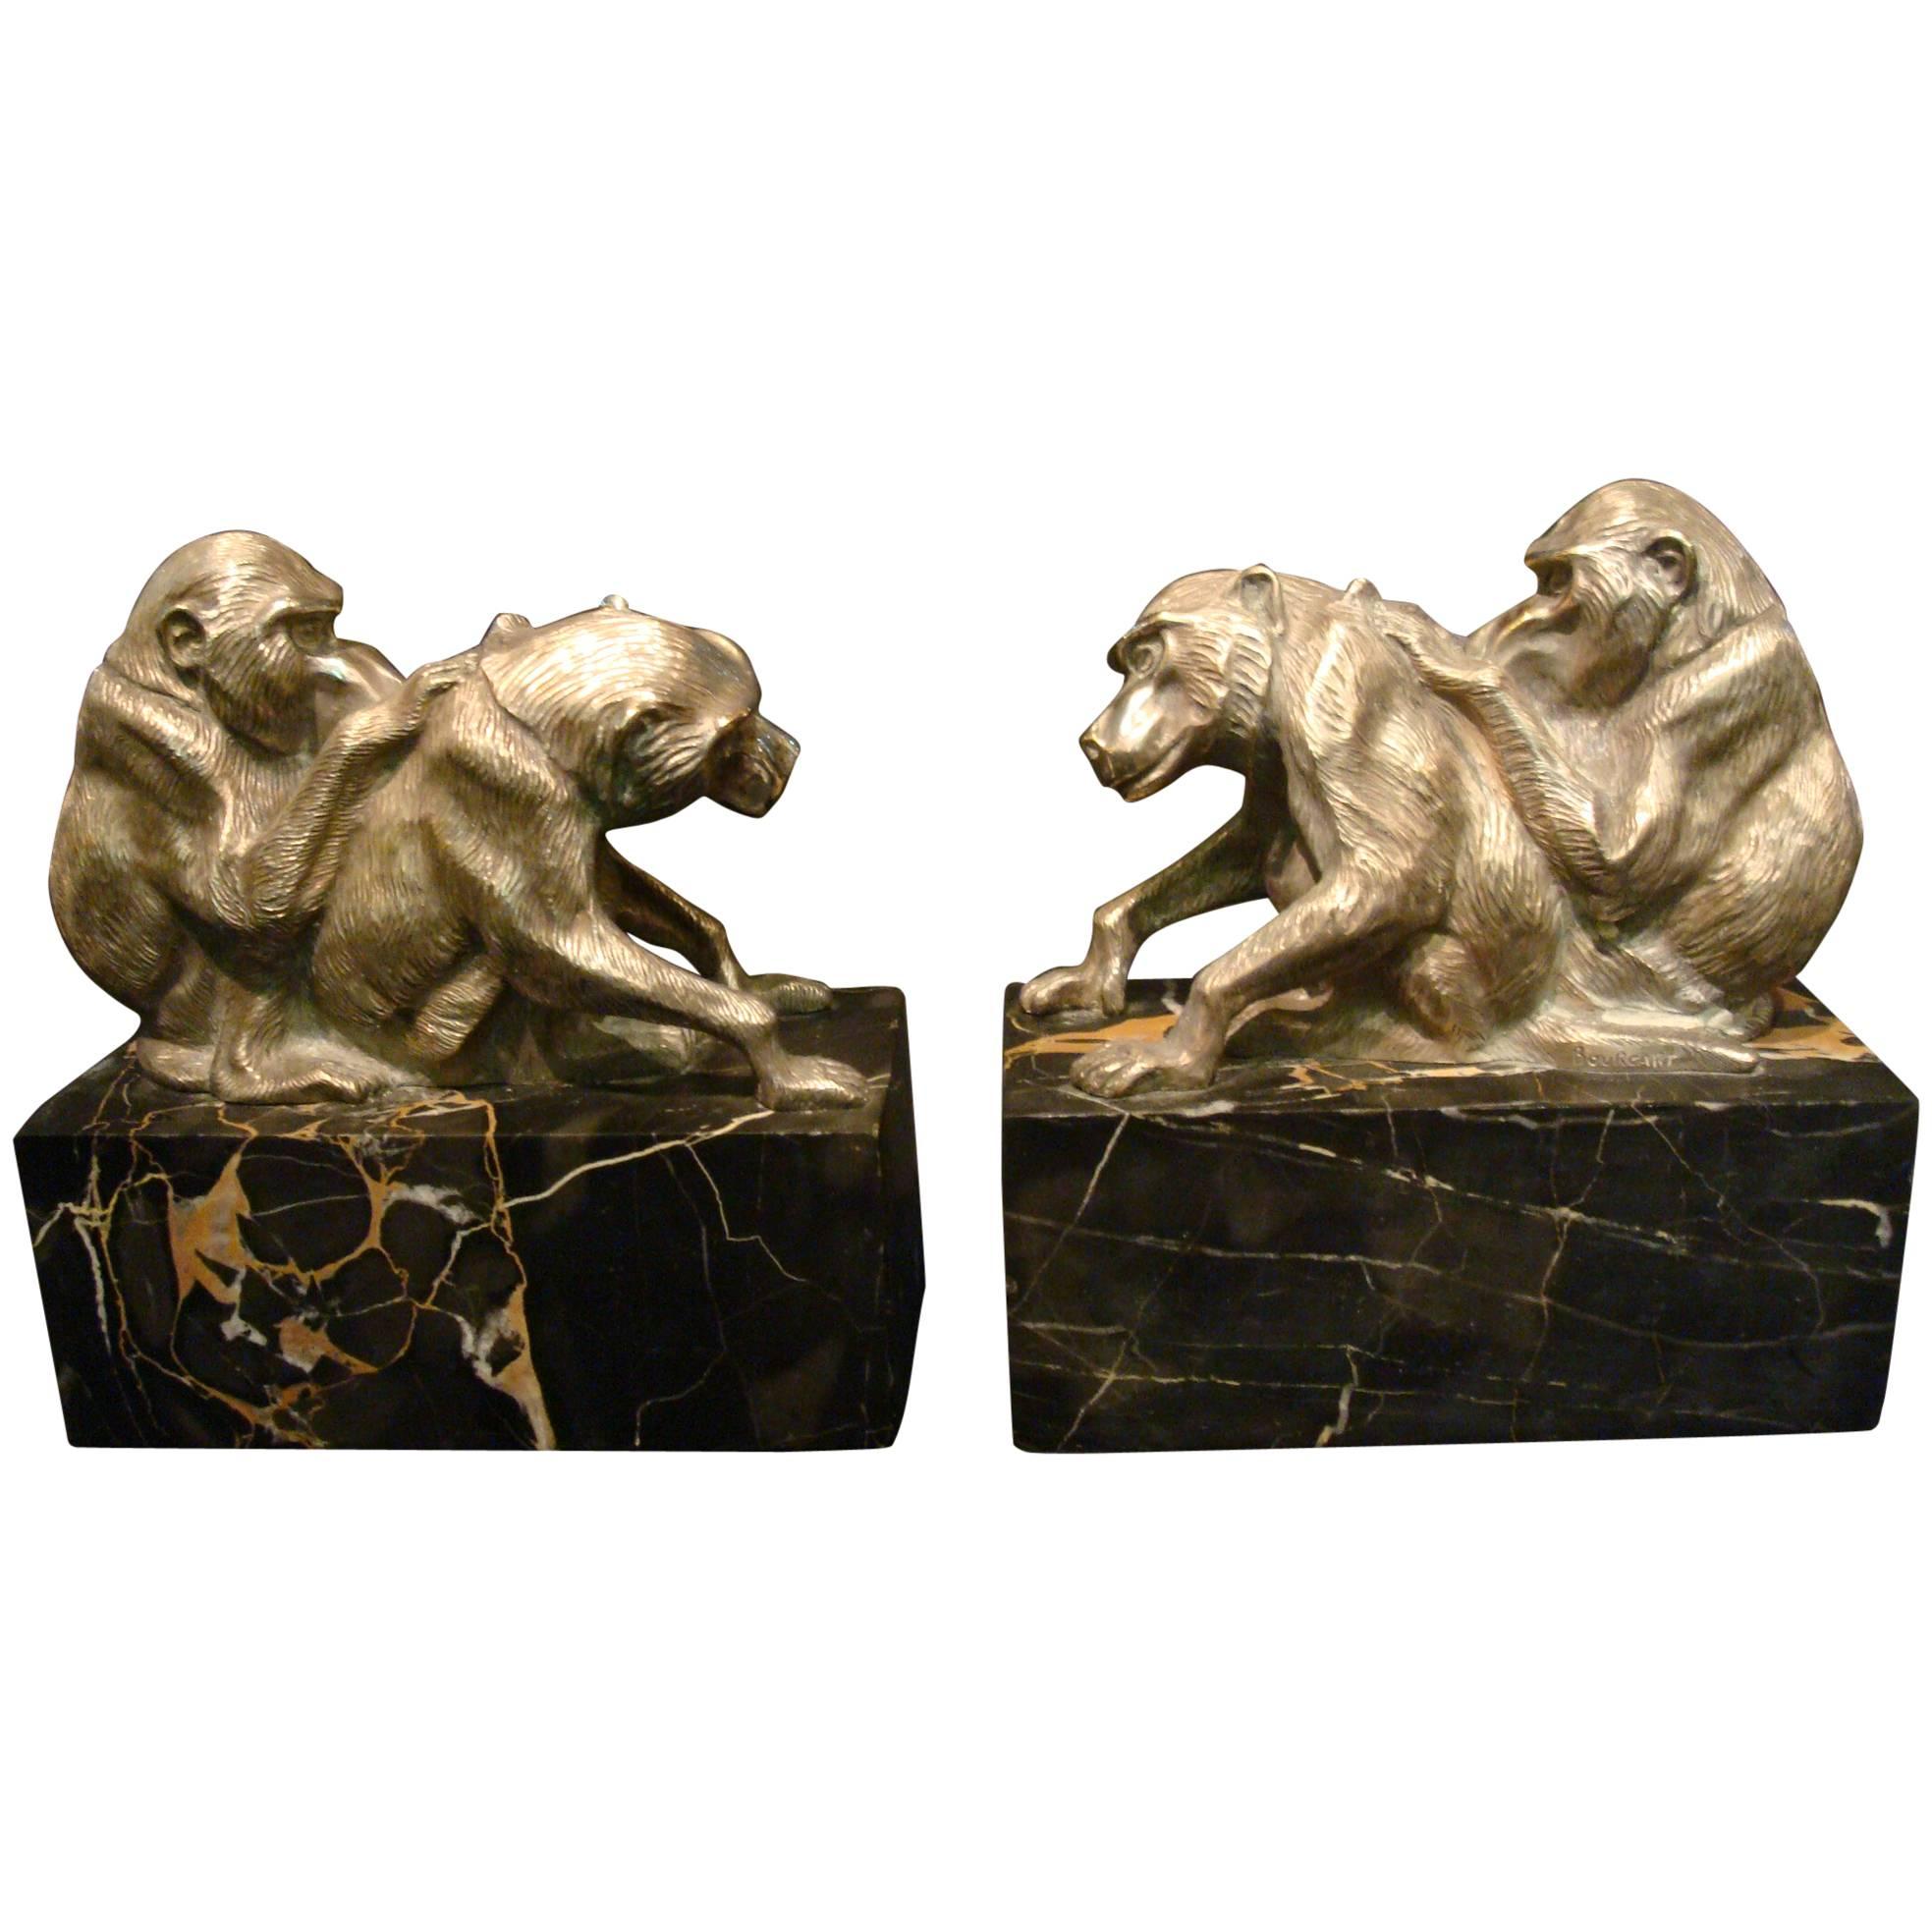 Art Deco silvered sculpture of  Group of Monkey's Bookends, France, circa 1925